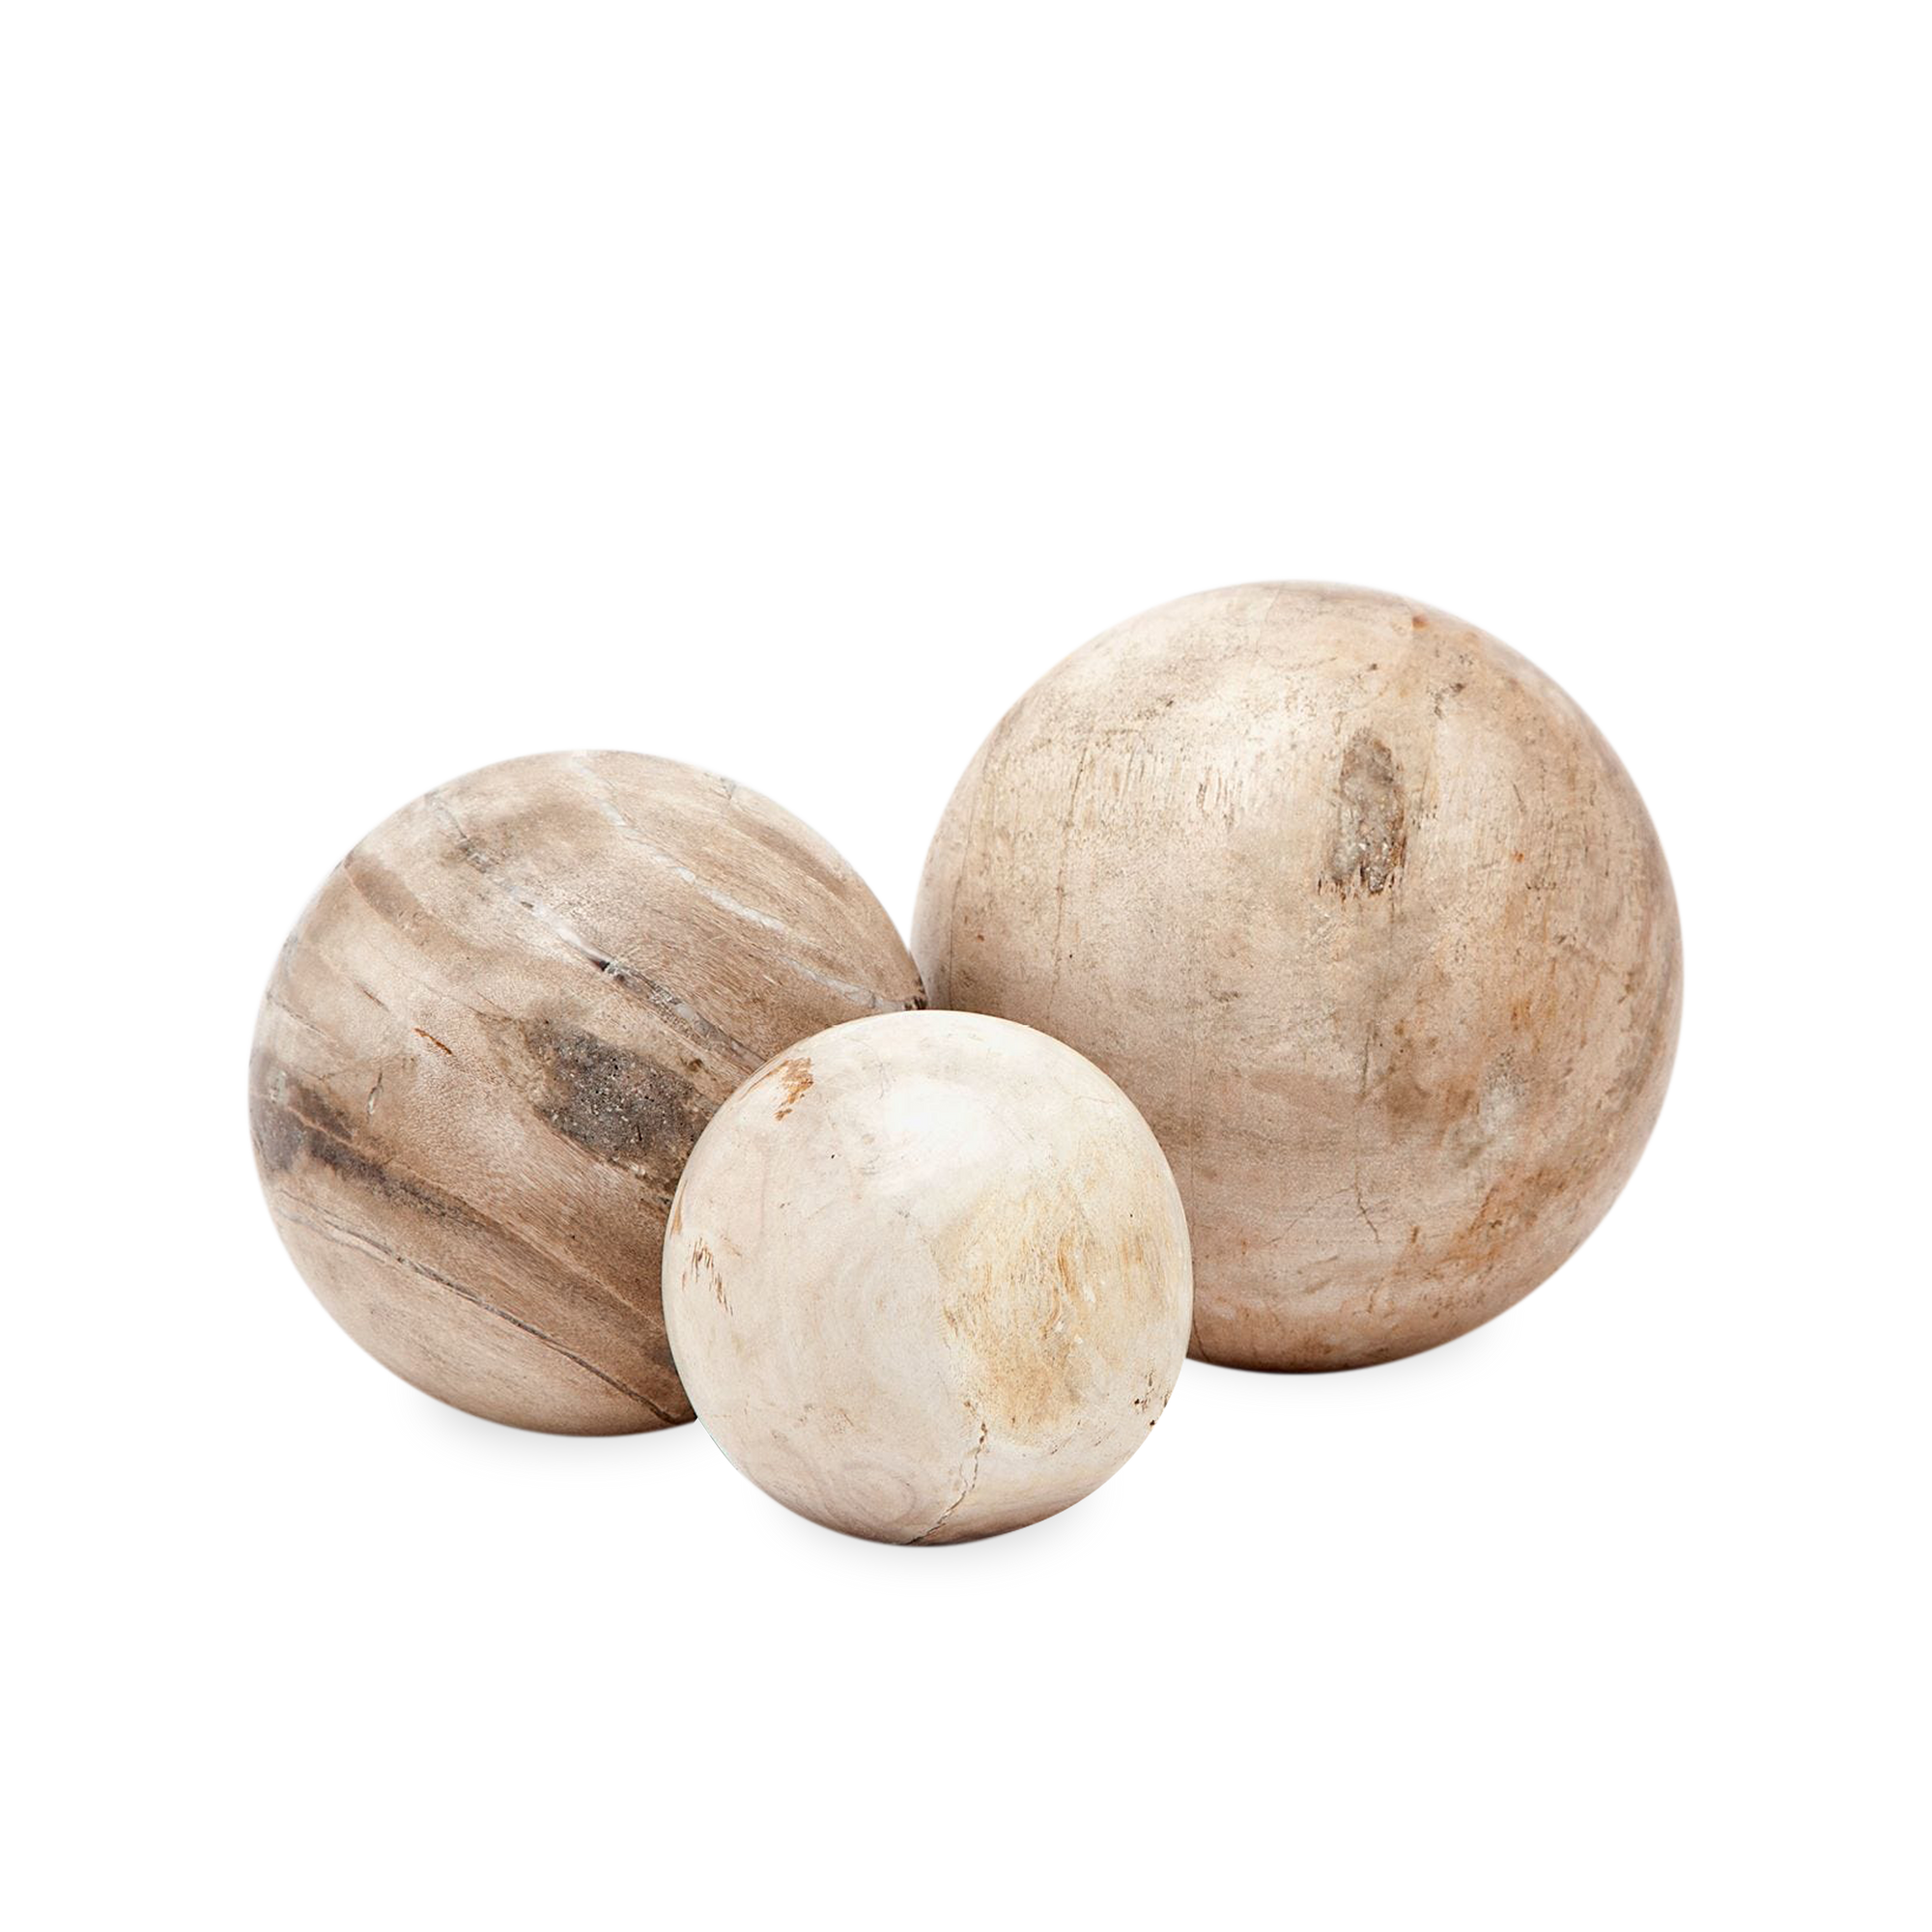 These one-of-a-kind spherical accents are the all-natural results of petrified wood.